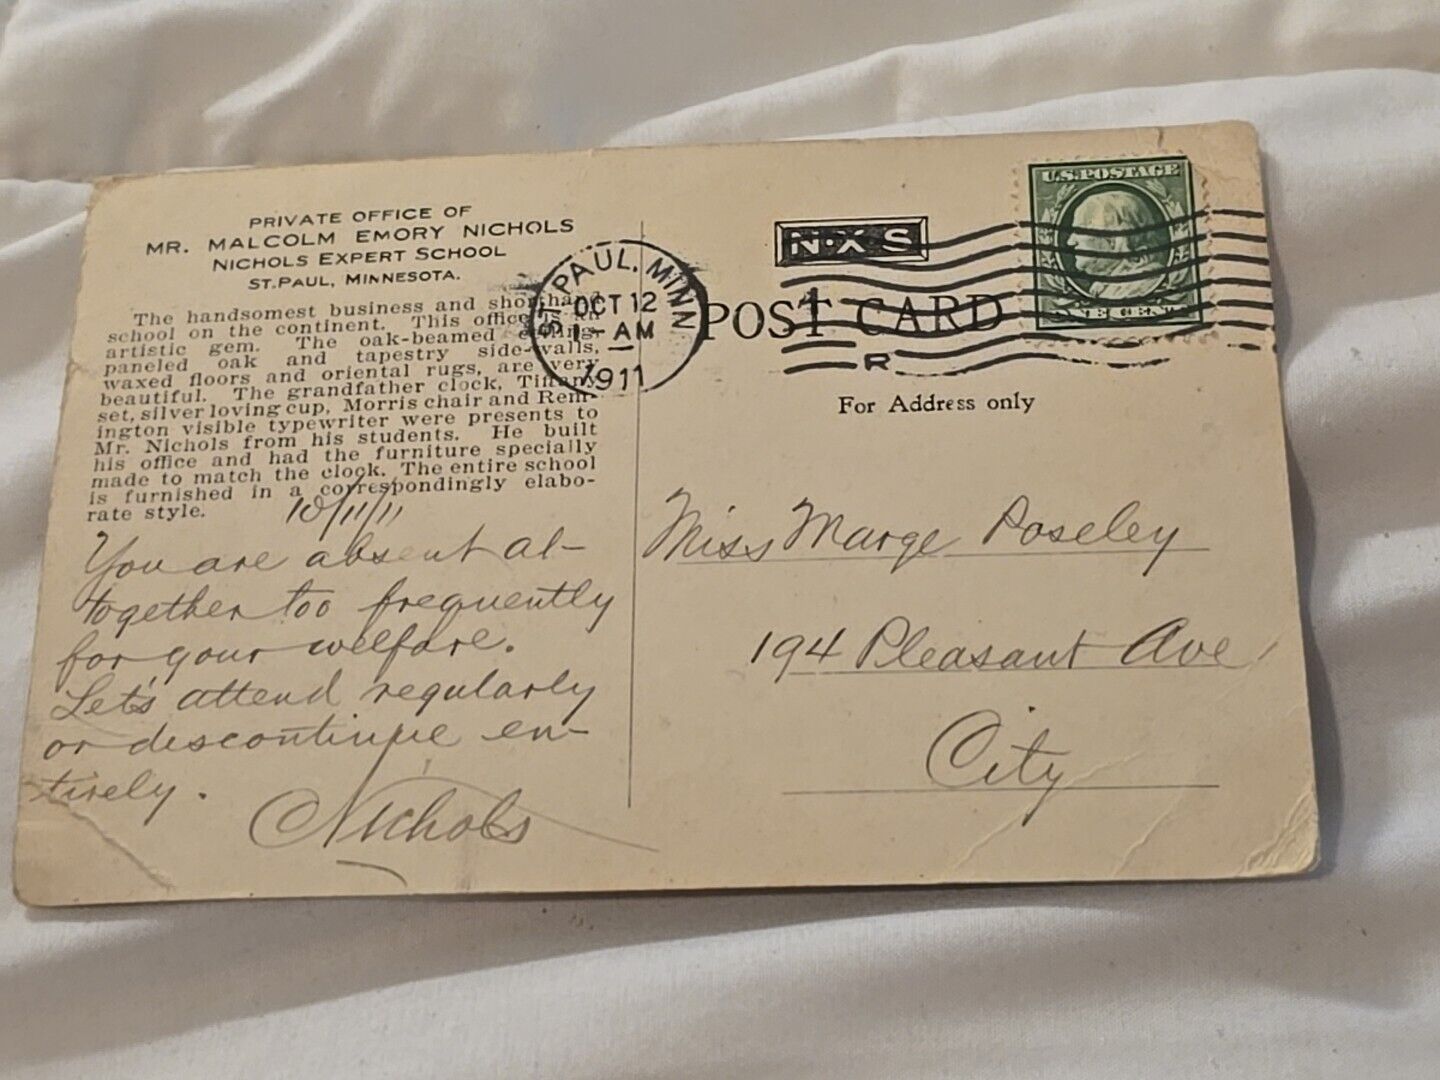 Nichols Expert School Postcard with Green Jefferson one cent stamp from 1911